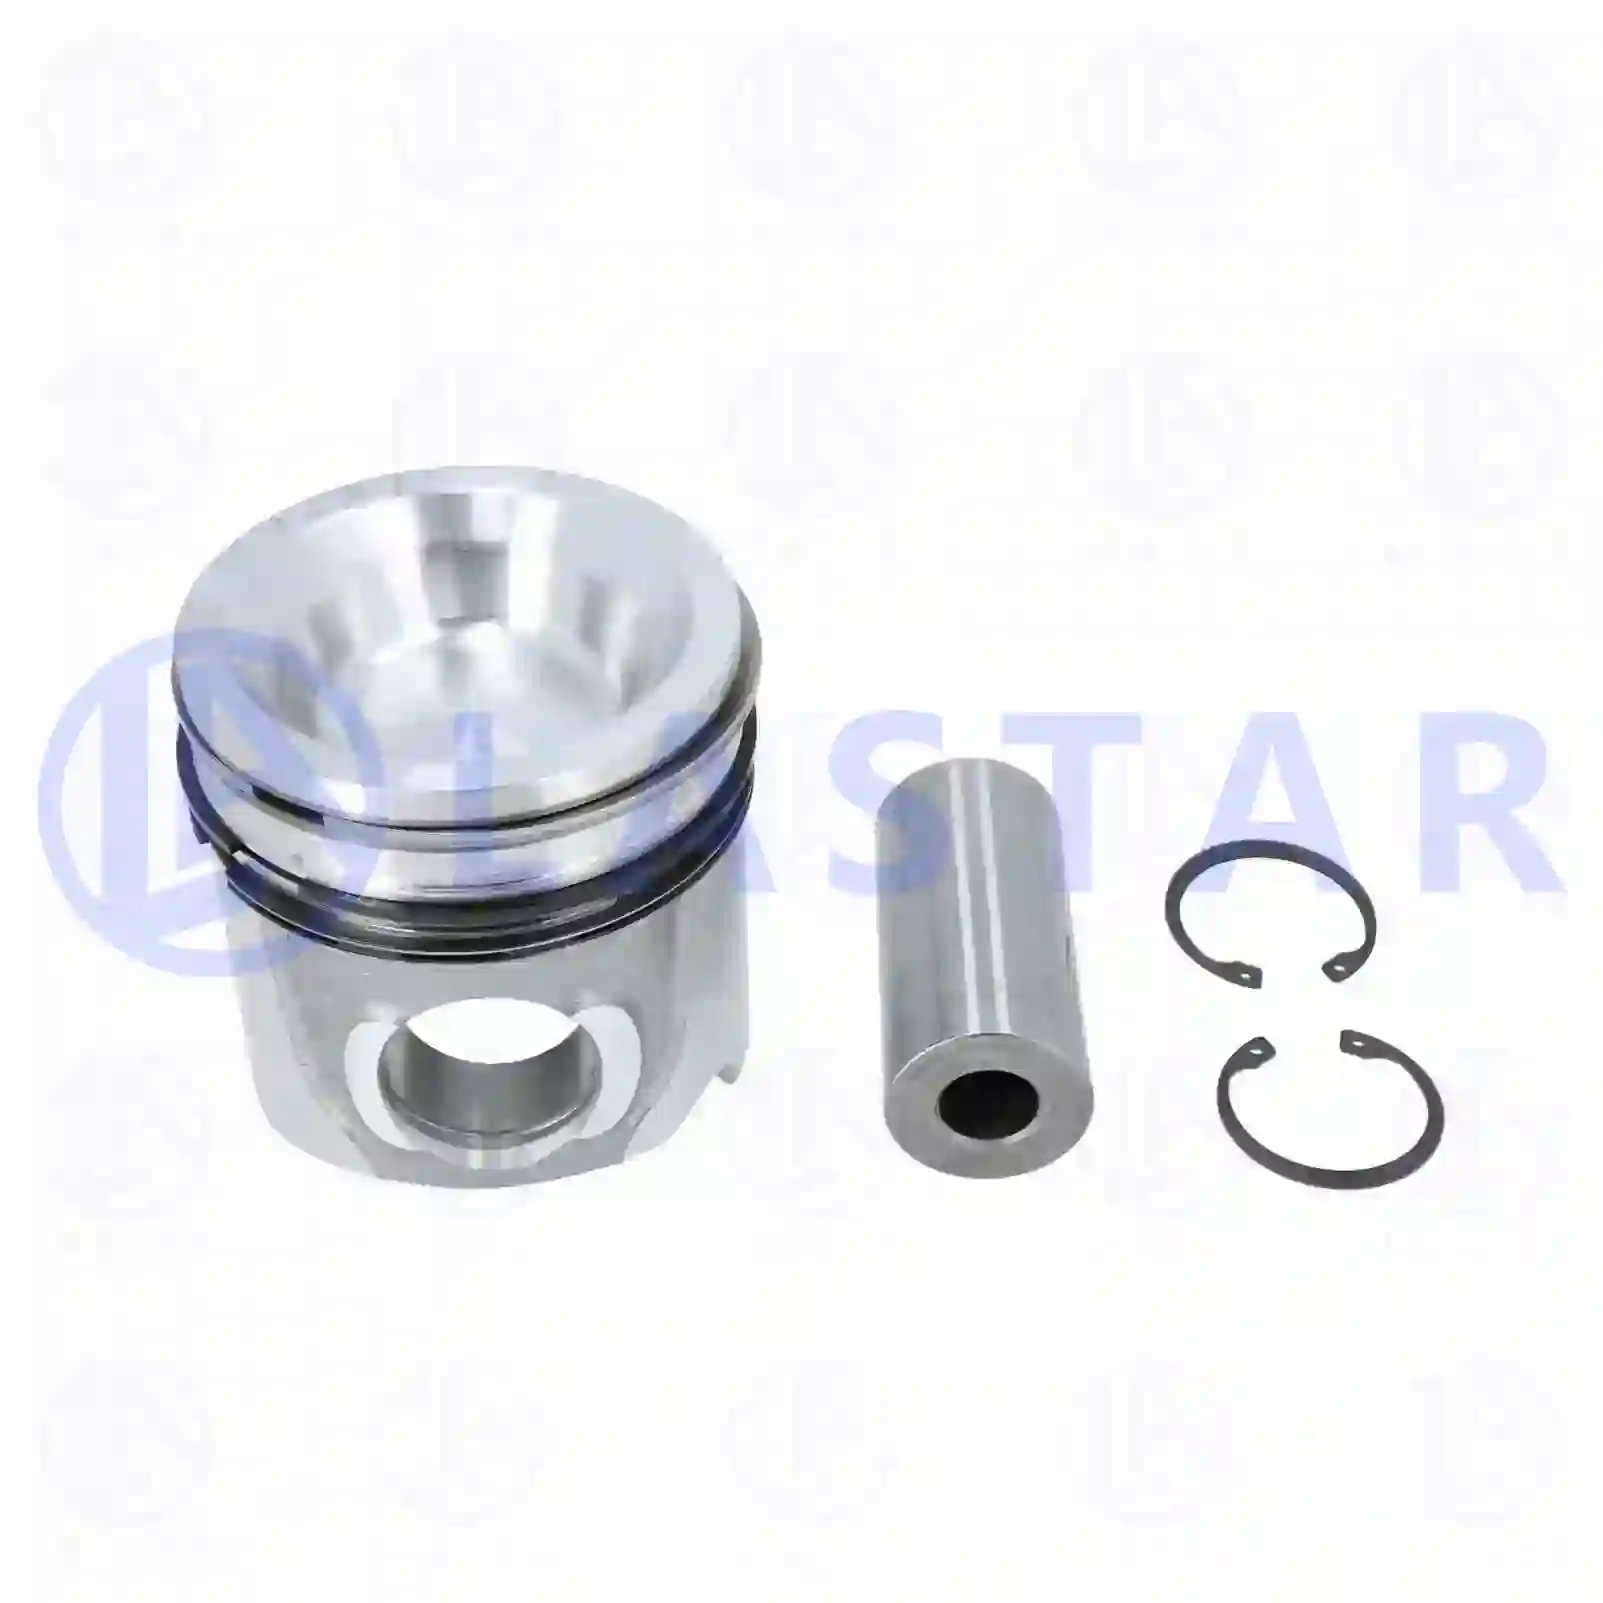 Piston, complete with rings, 77703922, 02994116, 02996305, 02996836, 08094514, 2994116, 2996305, 2996836, 8094514 ||  77703922 Lastar Spare Part | Truck Spare Parts, Auotomotive Spare Parts Piston, complete with rings, 77703922, 02994116, 02996305, 02996836, 08094514, 2994116, 2996305, 2996836, 8094514 ||  77703922 Lastar Spare Part | Truck Spare Parts, Auotomotive Spare Parts